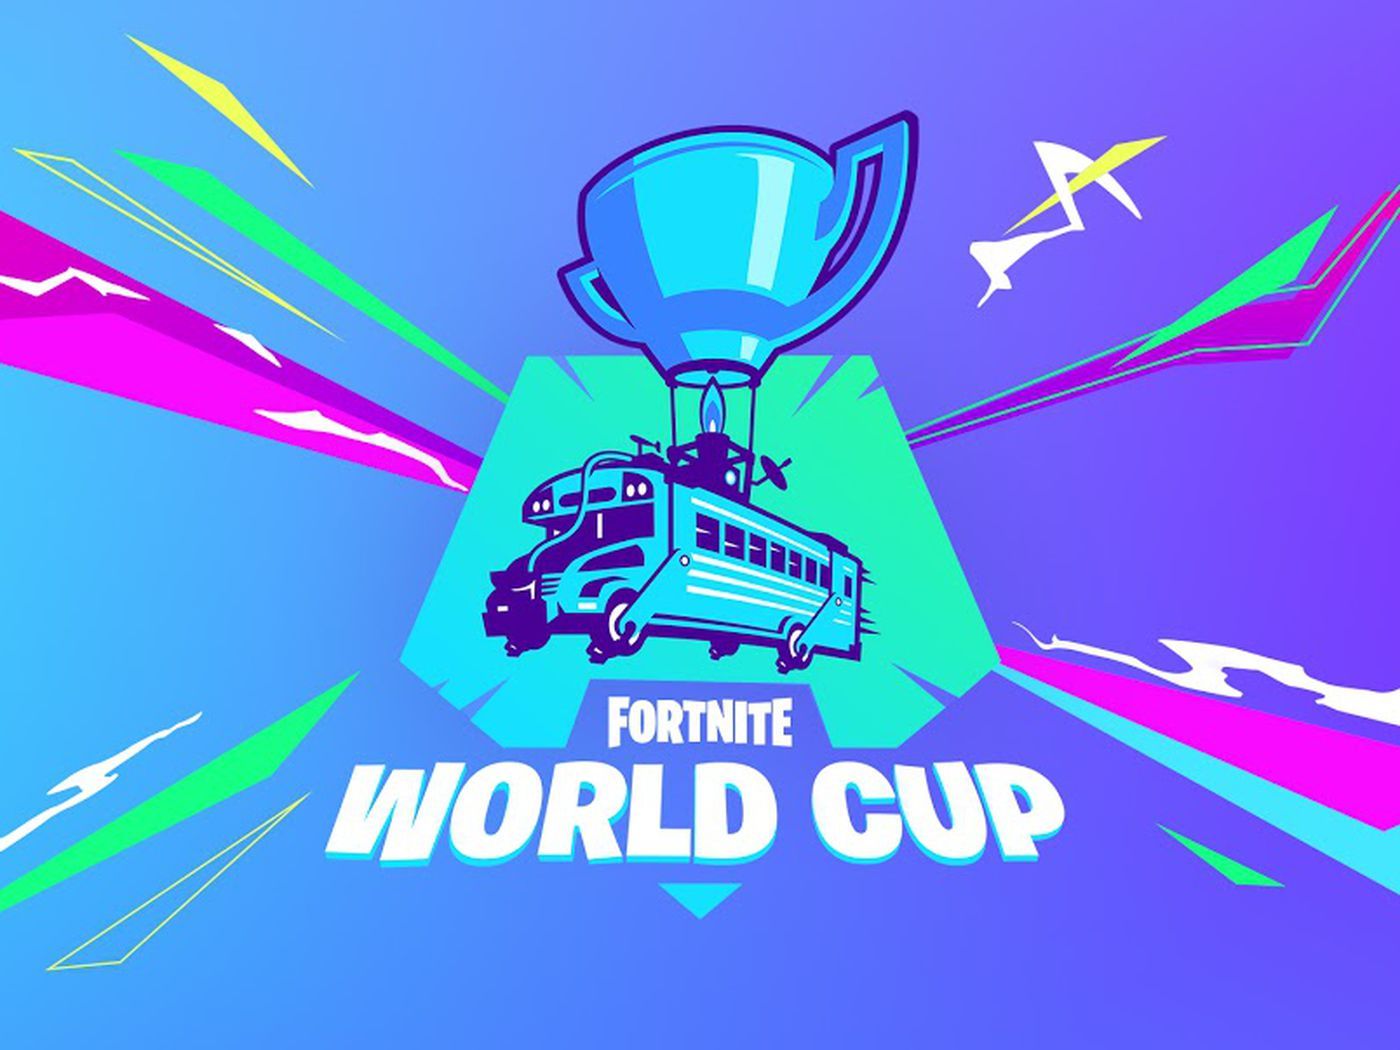 Fortnite's $30 million World Cup final is happening in July